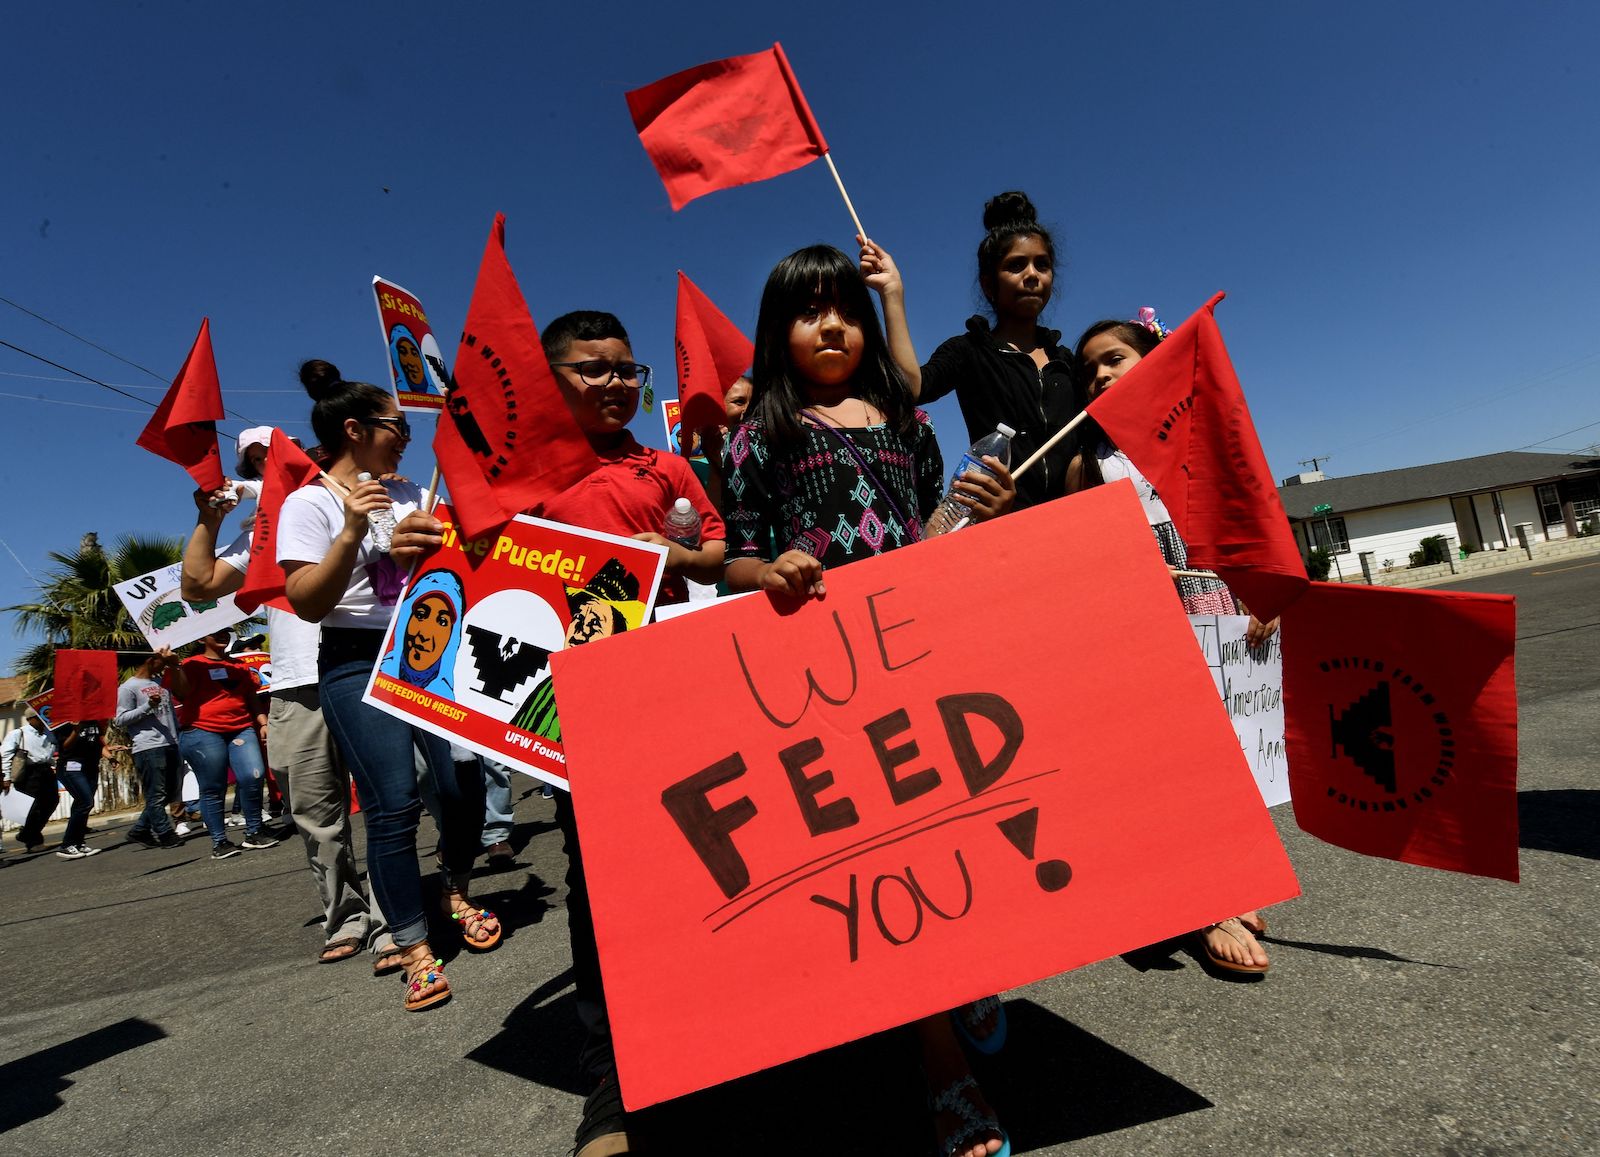 A young girl carries a red sign that says 'We FEED You'